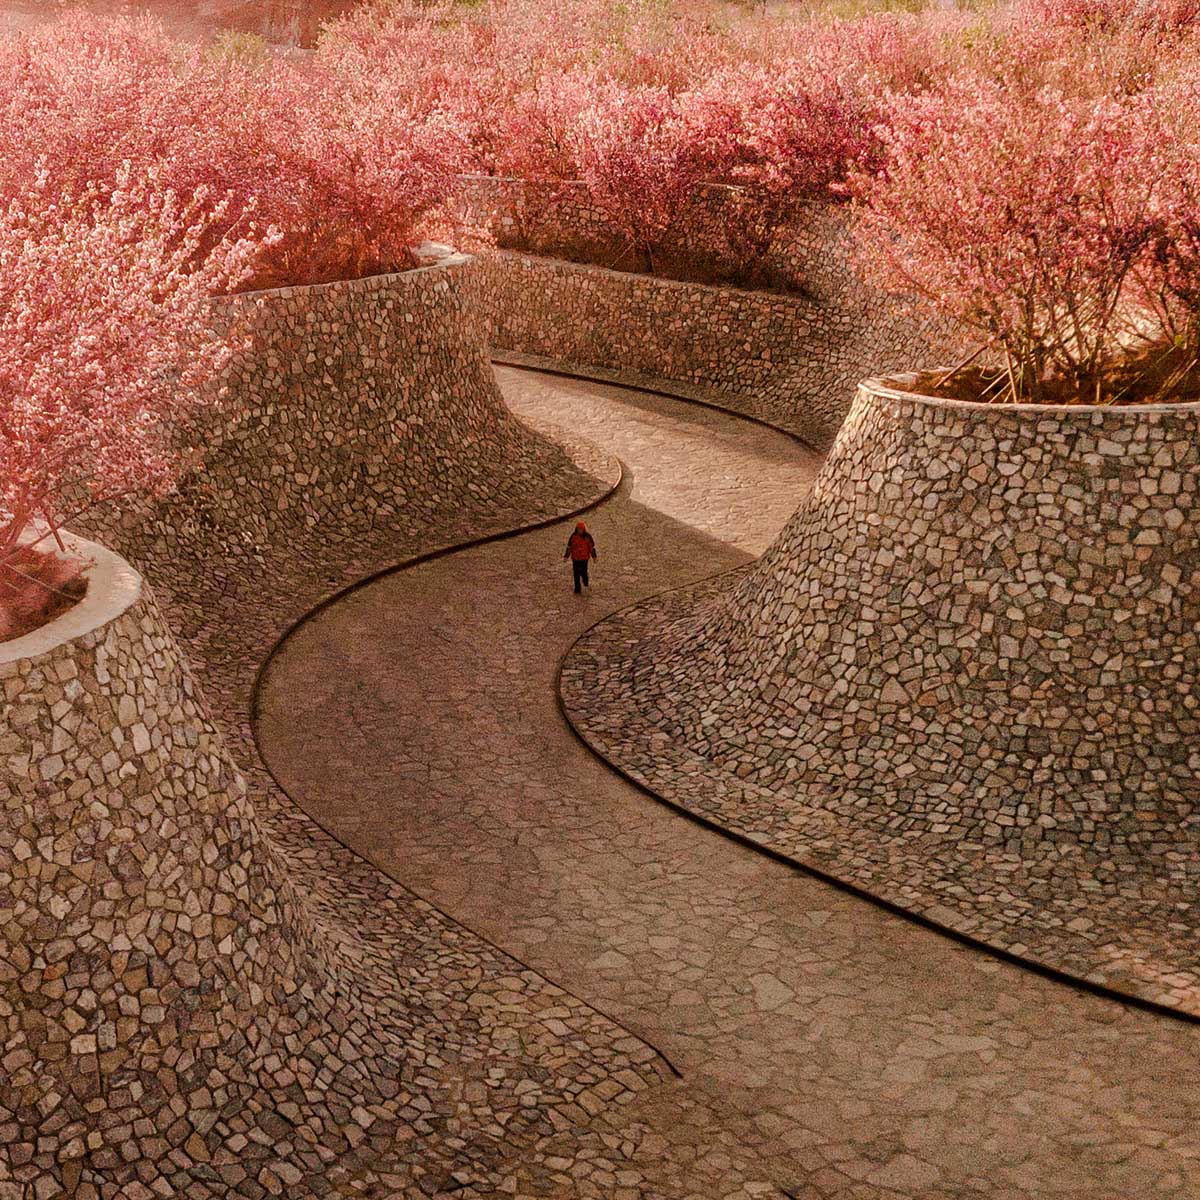 Rizhao Bailuwan Cherry Blossom Town Art and Cultural Space by Hu Sun - S.P.I.